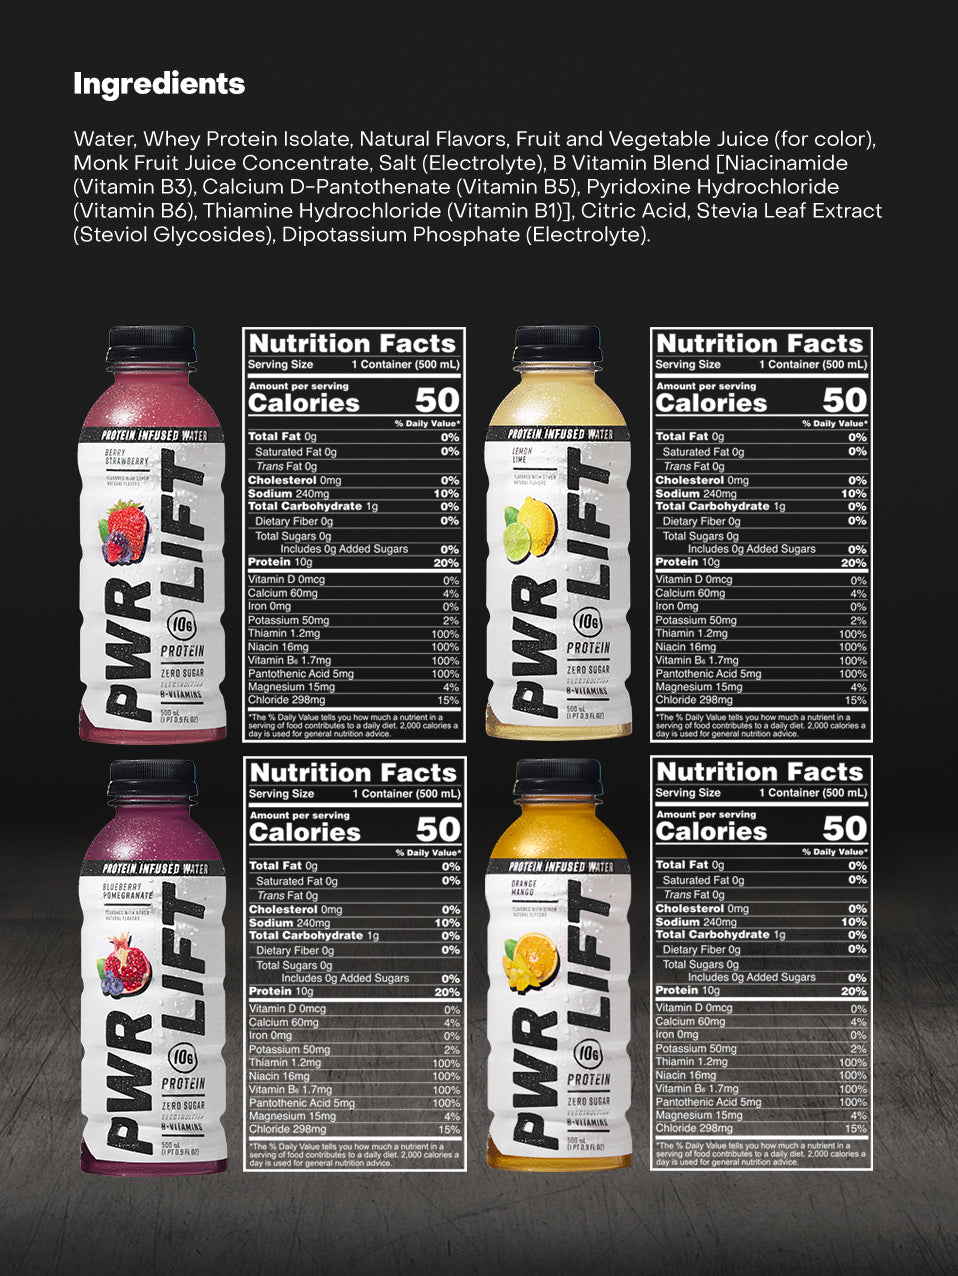 Ingredients and Nutrition facts grid 2x2 for each of the PWR LIFT flavours 